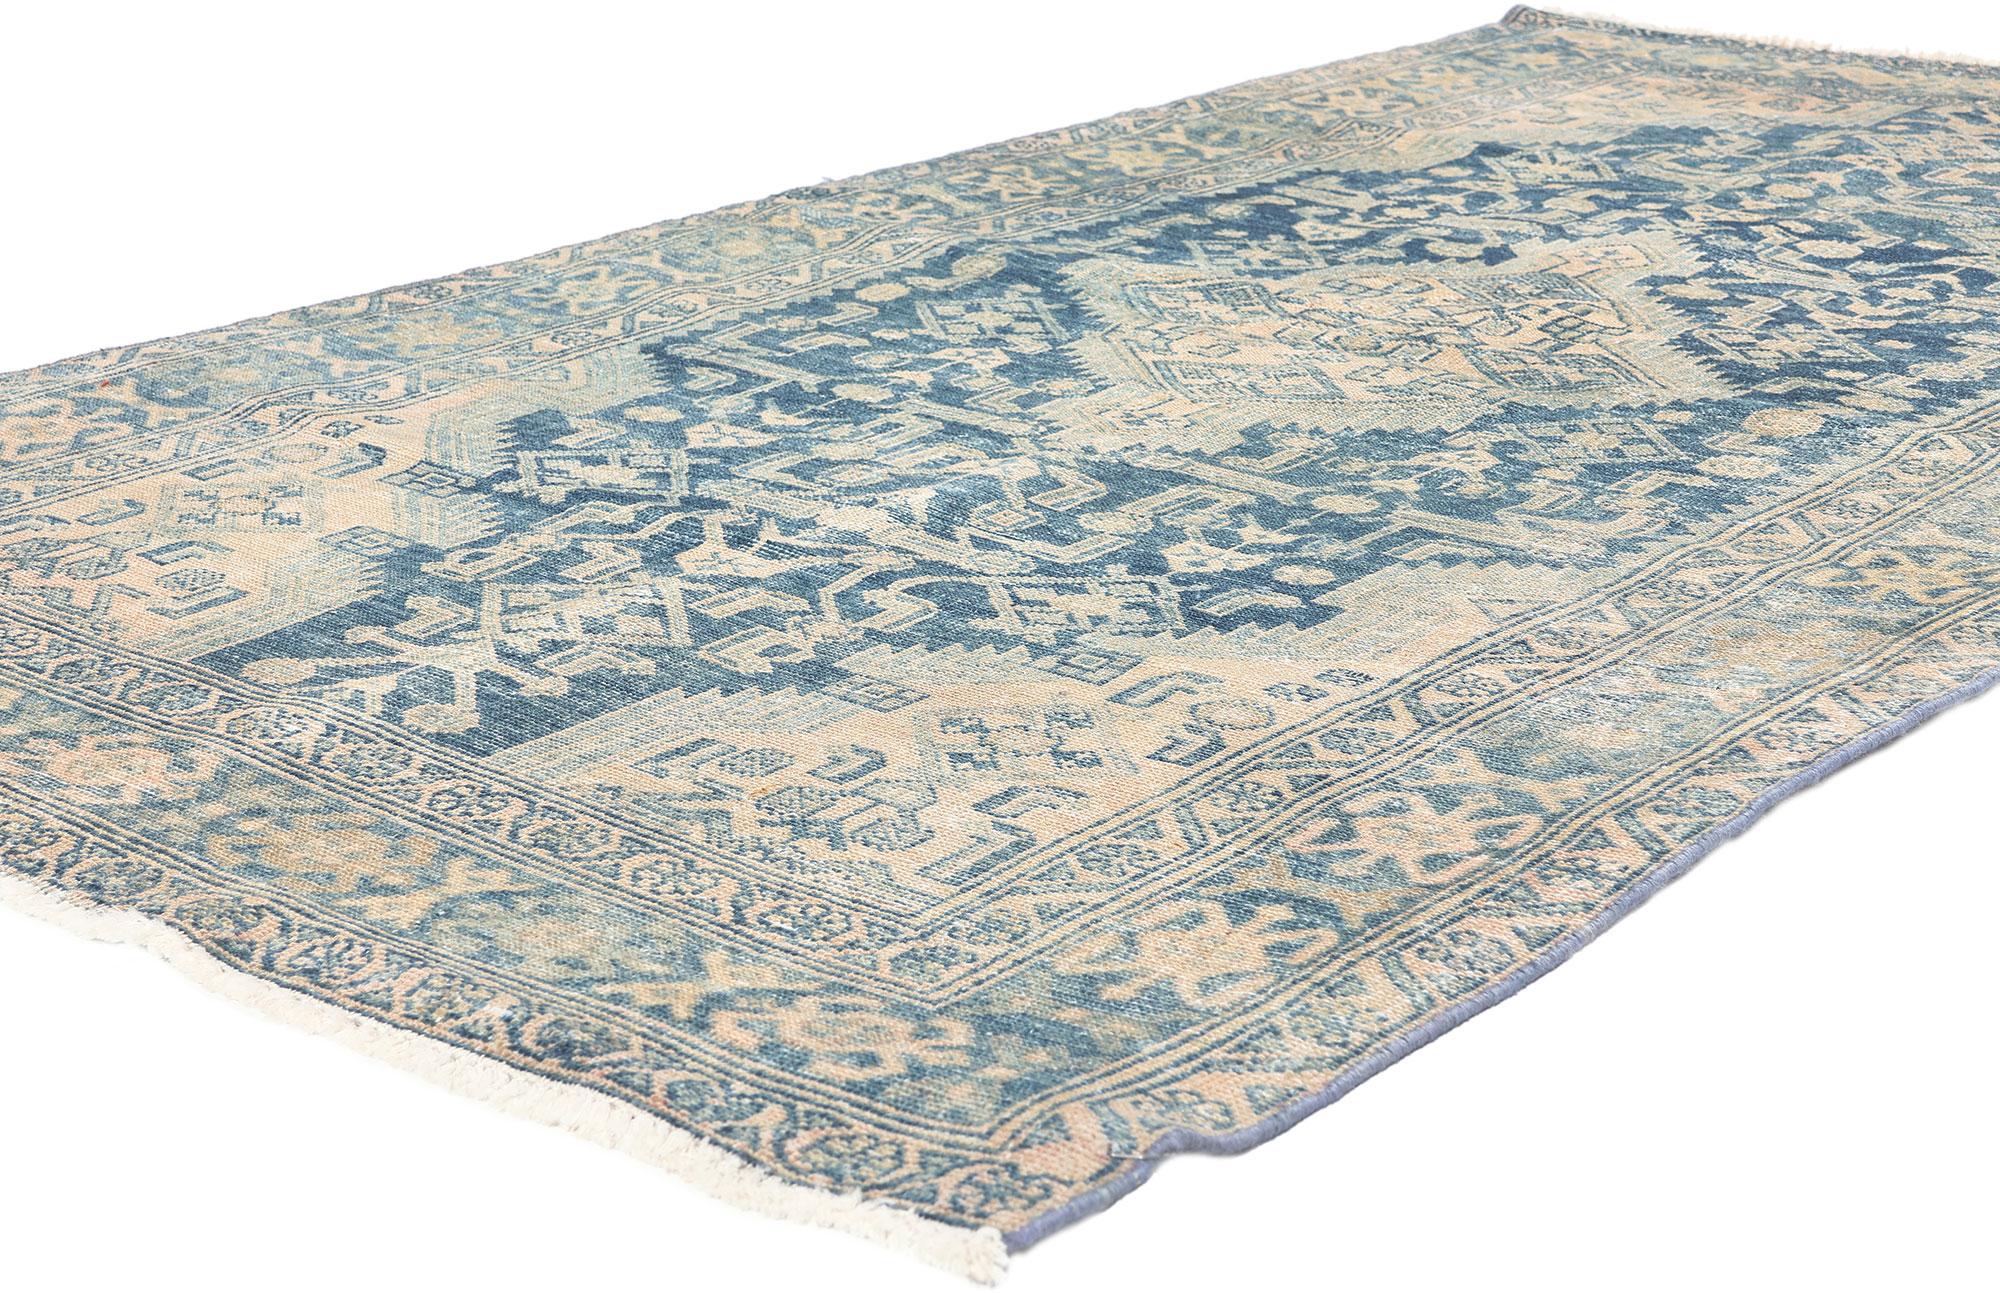 61263 Distressed Antique Persian Malayer Rug, 03'11 x 07'03.
​Modern masculine meets subtle sophistication in this hand knotted wool distressed antique Persian Malayer rug.

Rendered in variegated shades of Aegean blue, beige, cerulean, tan,